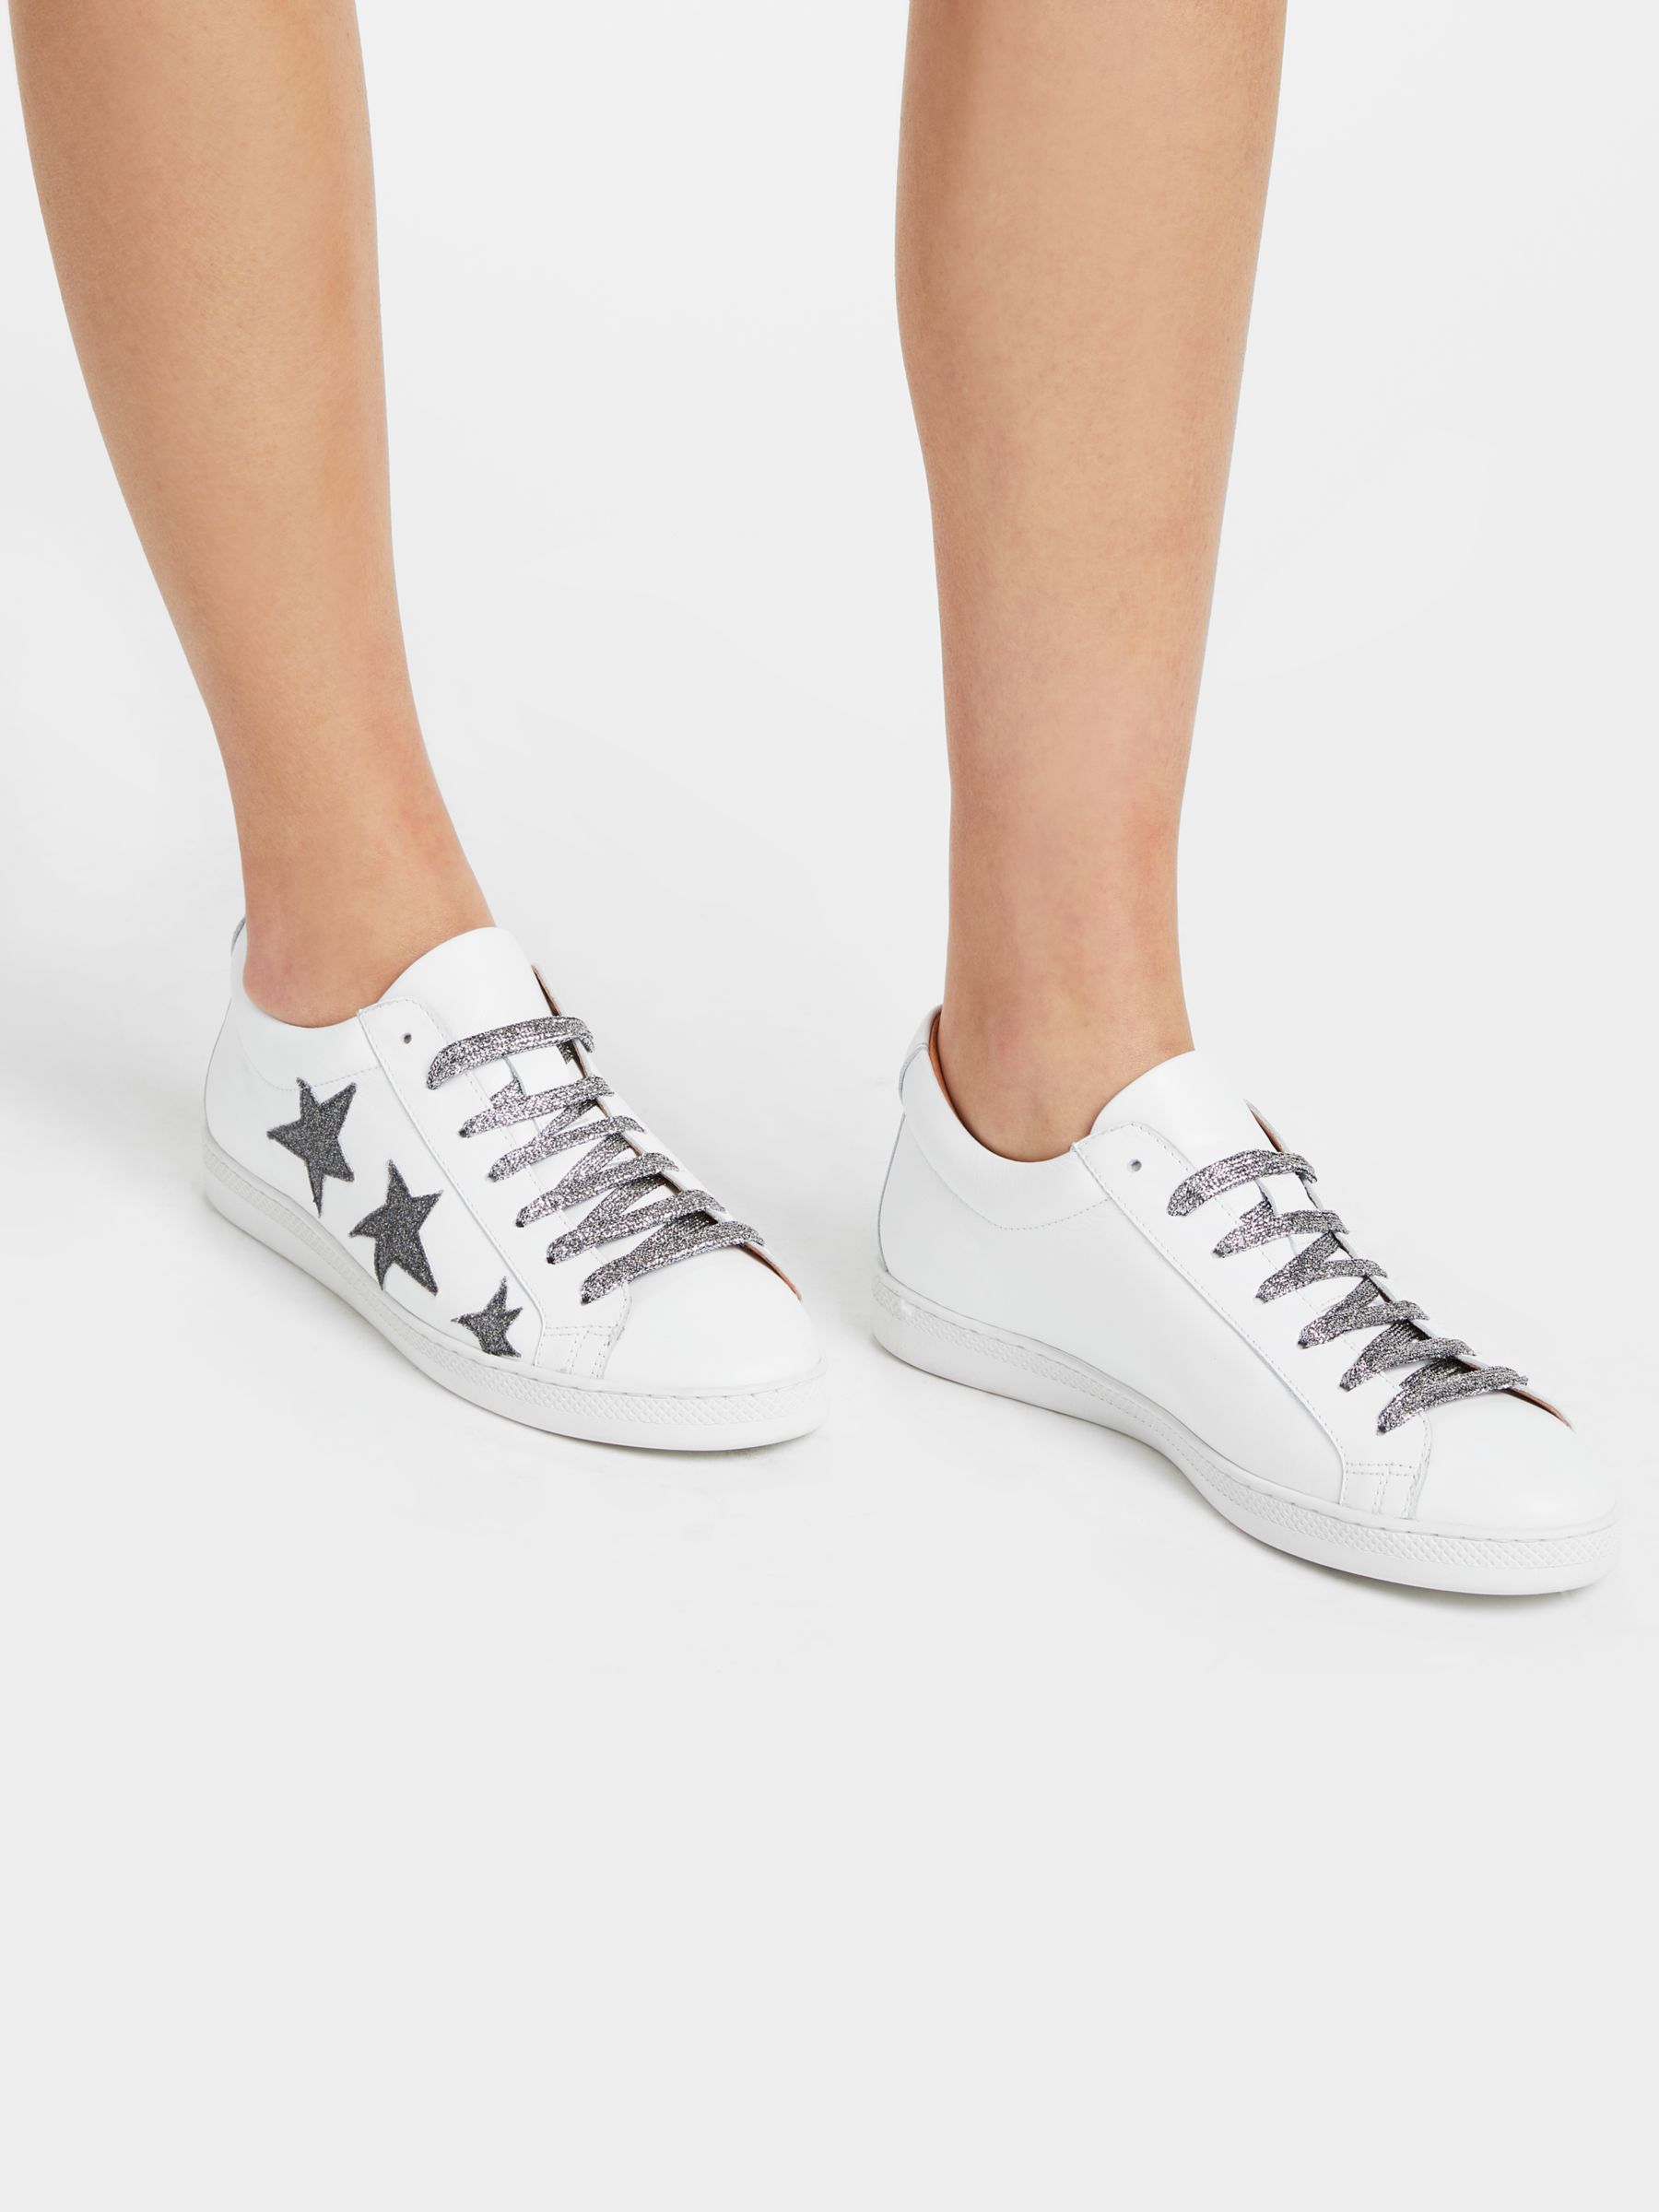 white trainers with stars on them